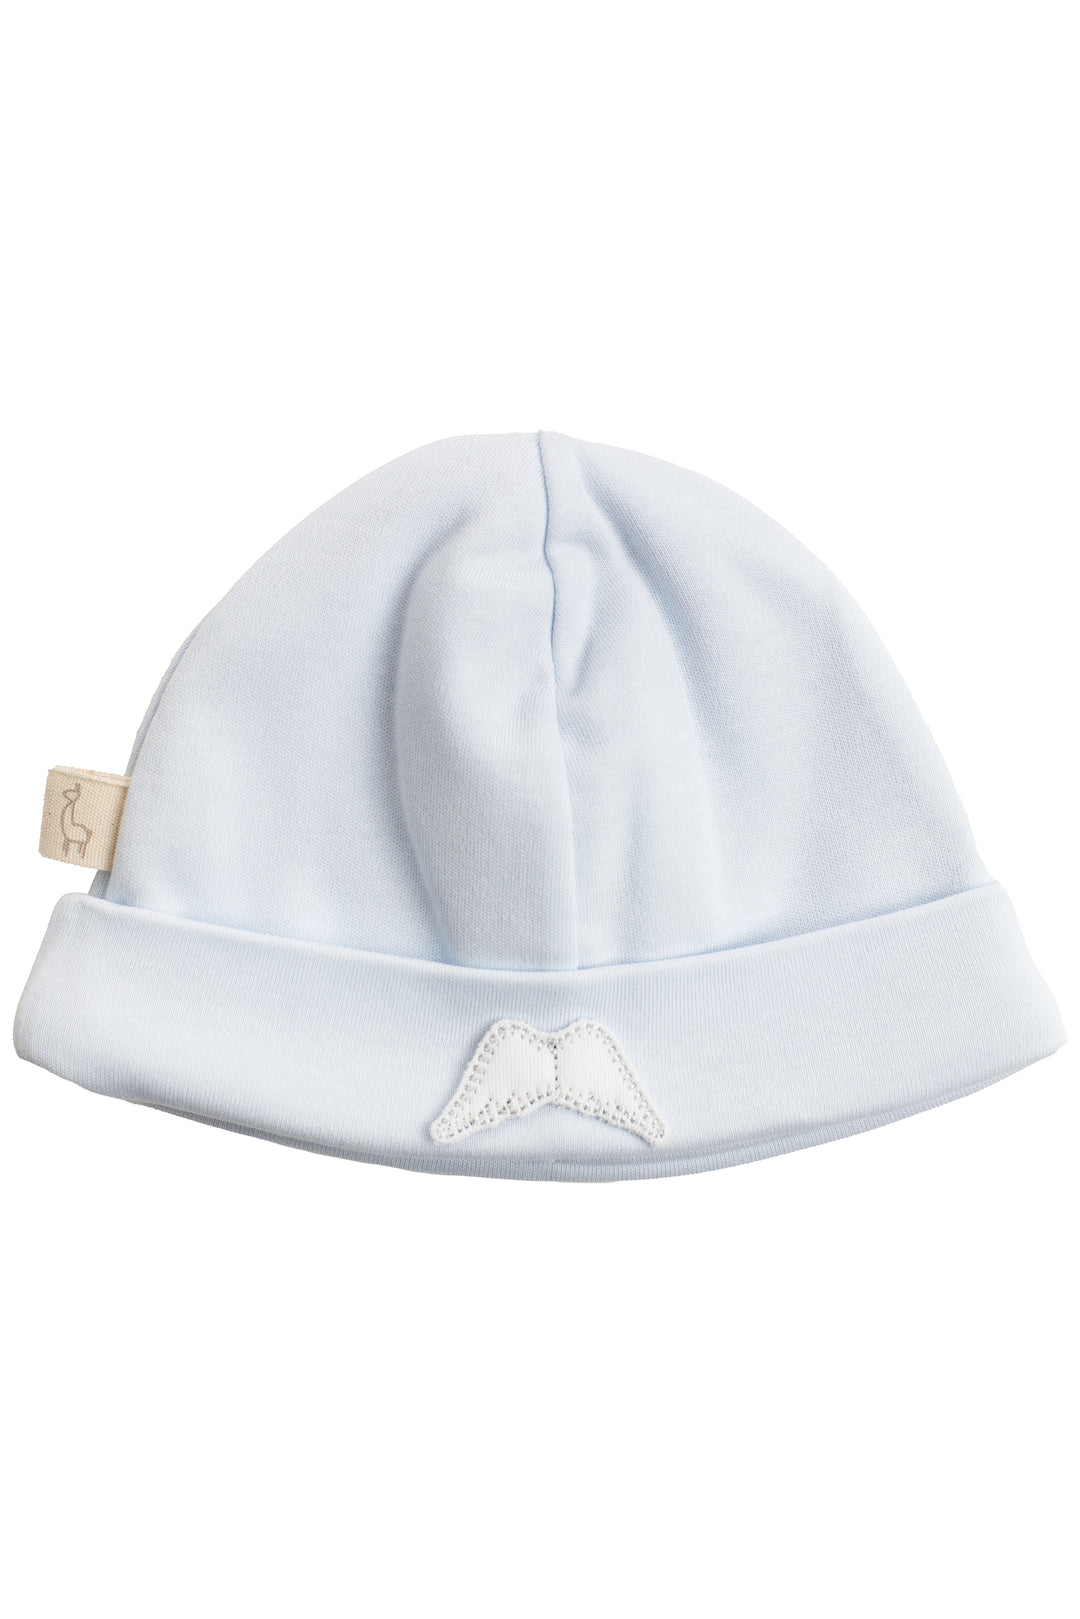 Baby Gi Angel Wing Cotton Beanie Hat | Millie and John